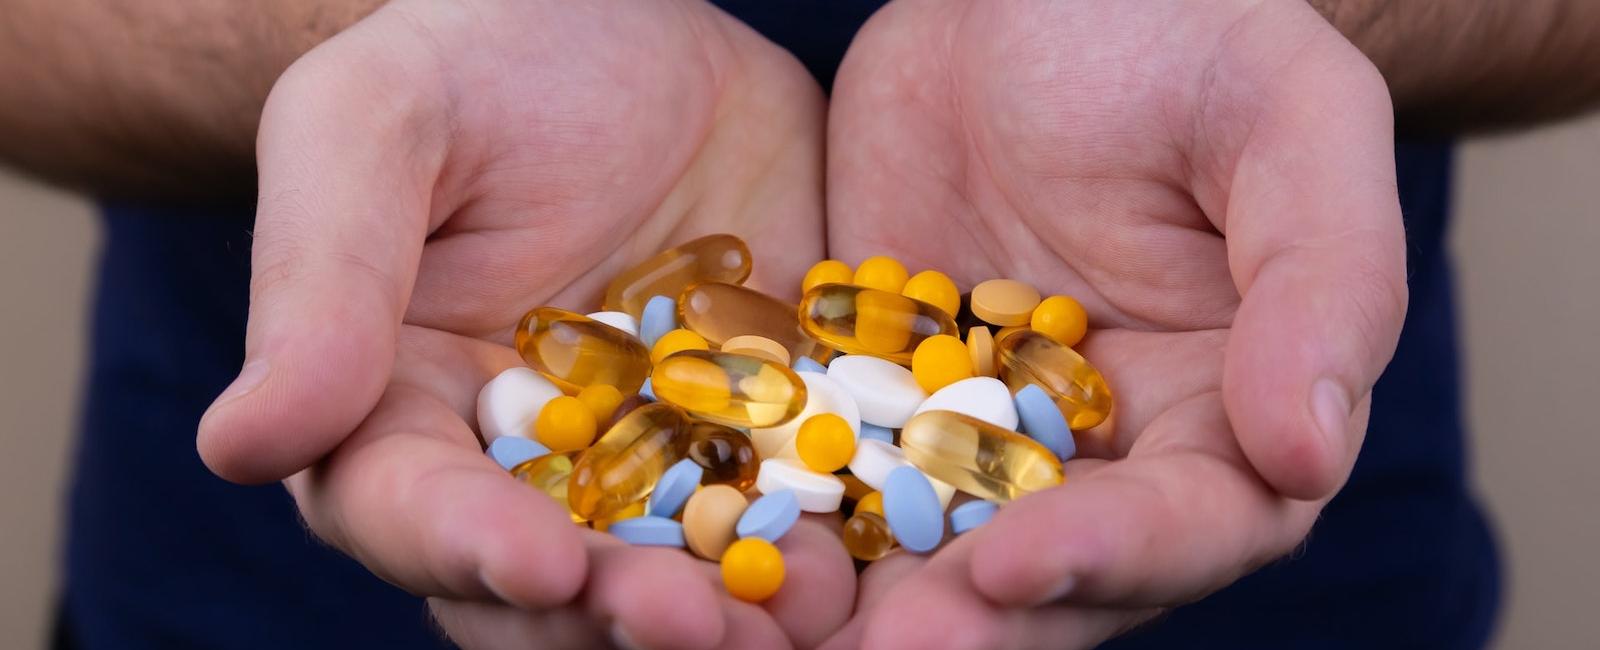 Common Vitamins & Supplements You Should Take Deal